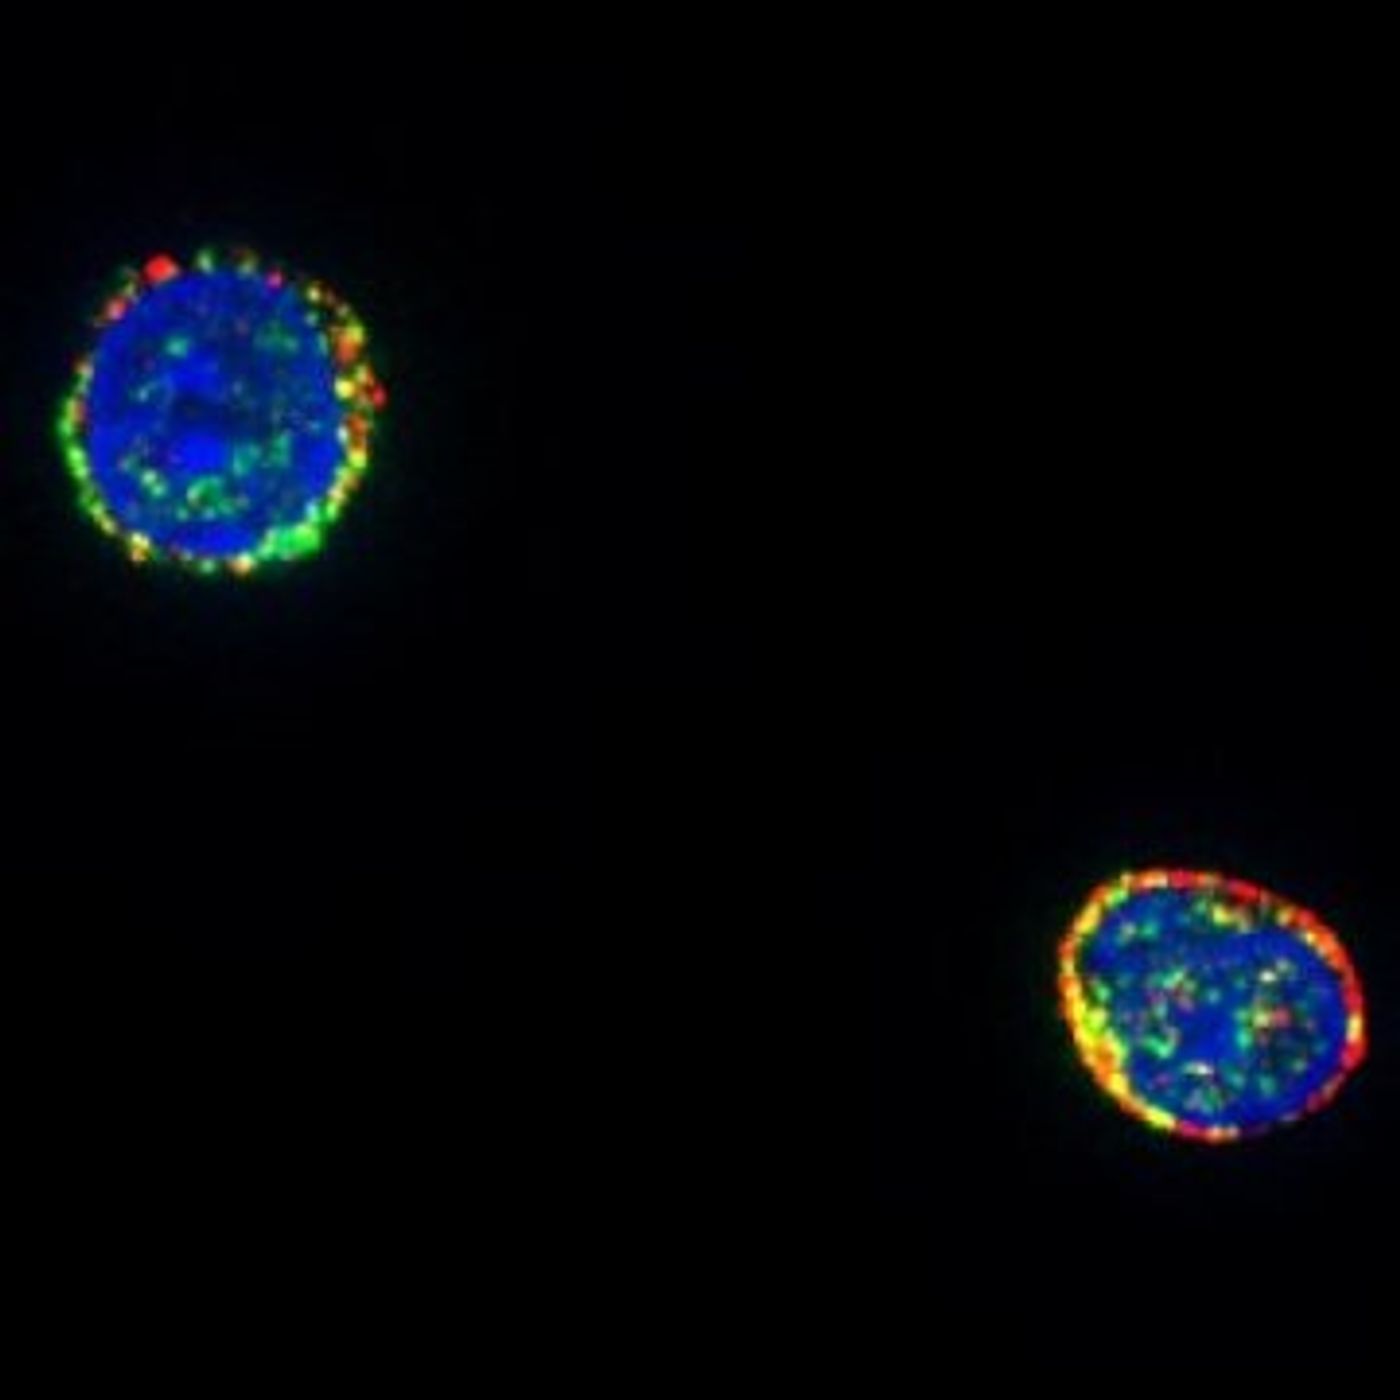 T cells from a HIV-infected patient were stained for HIV RNA (red), HIV protein (green) and the nucleus (blue)